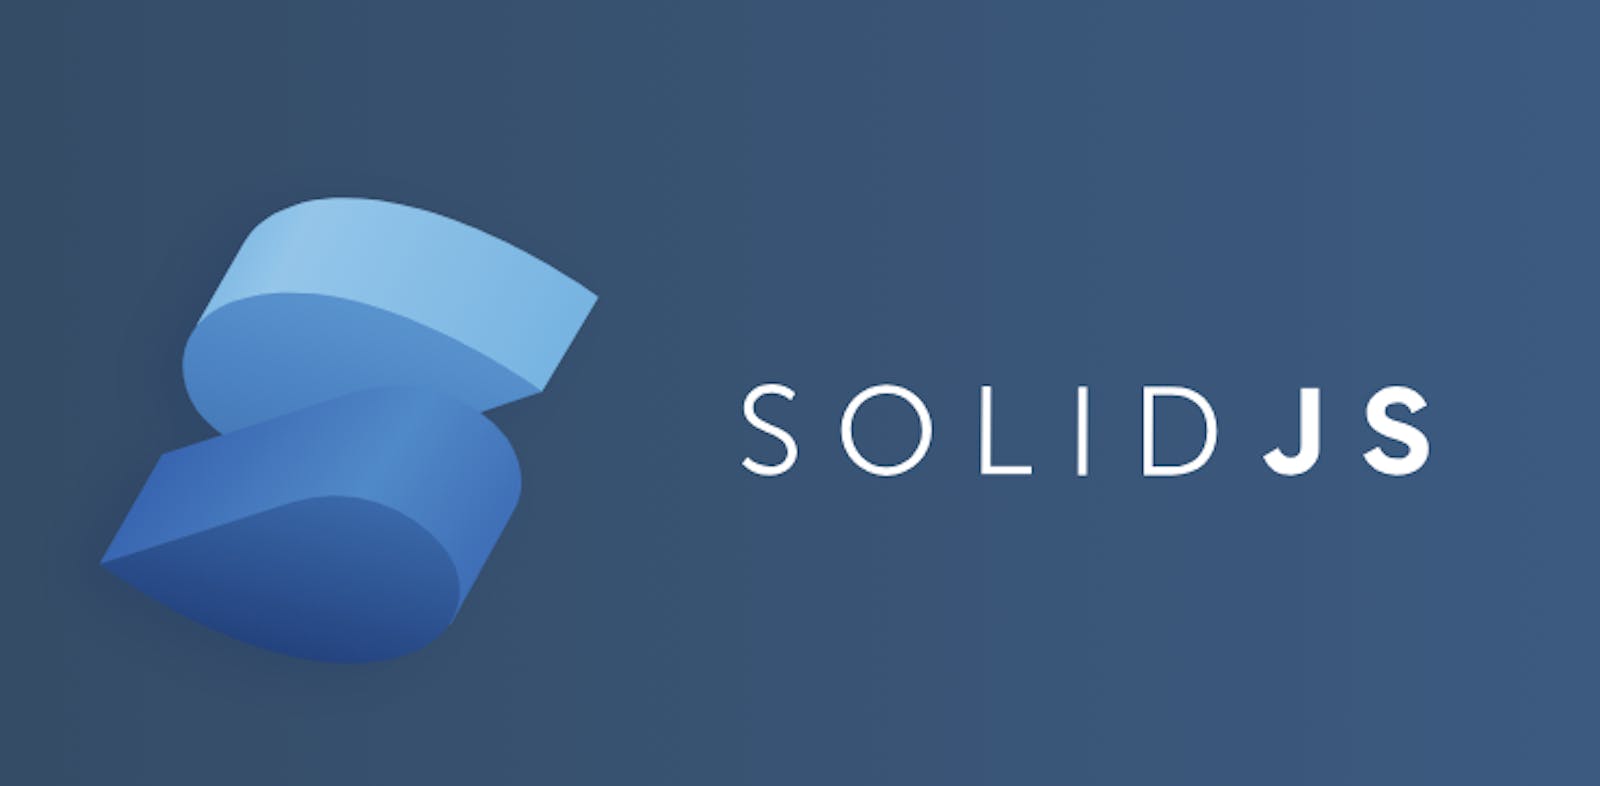 Solid.js is a refreshing take on rendering